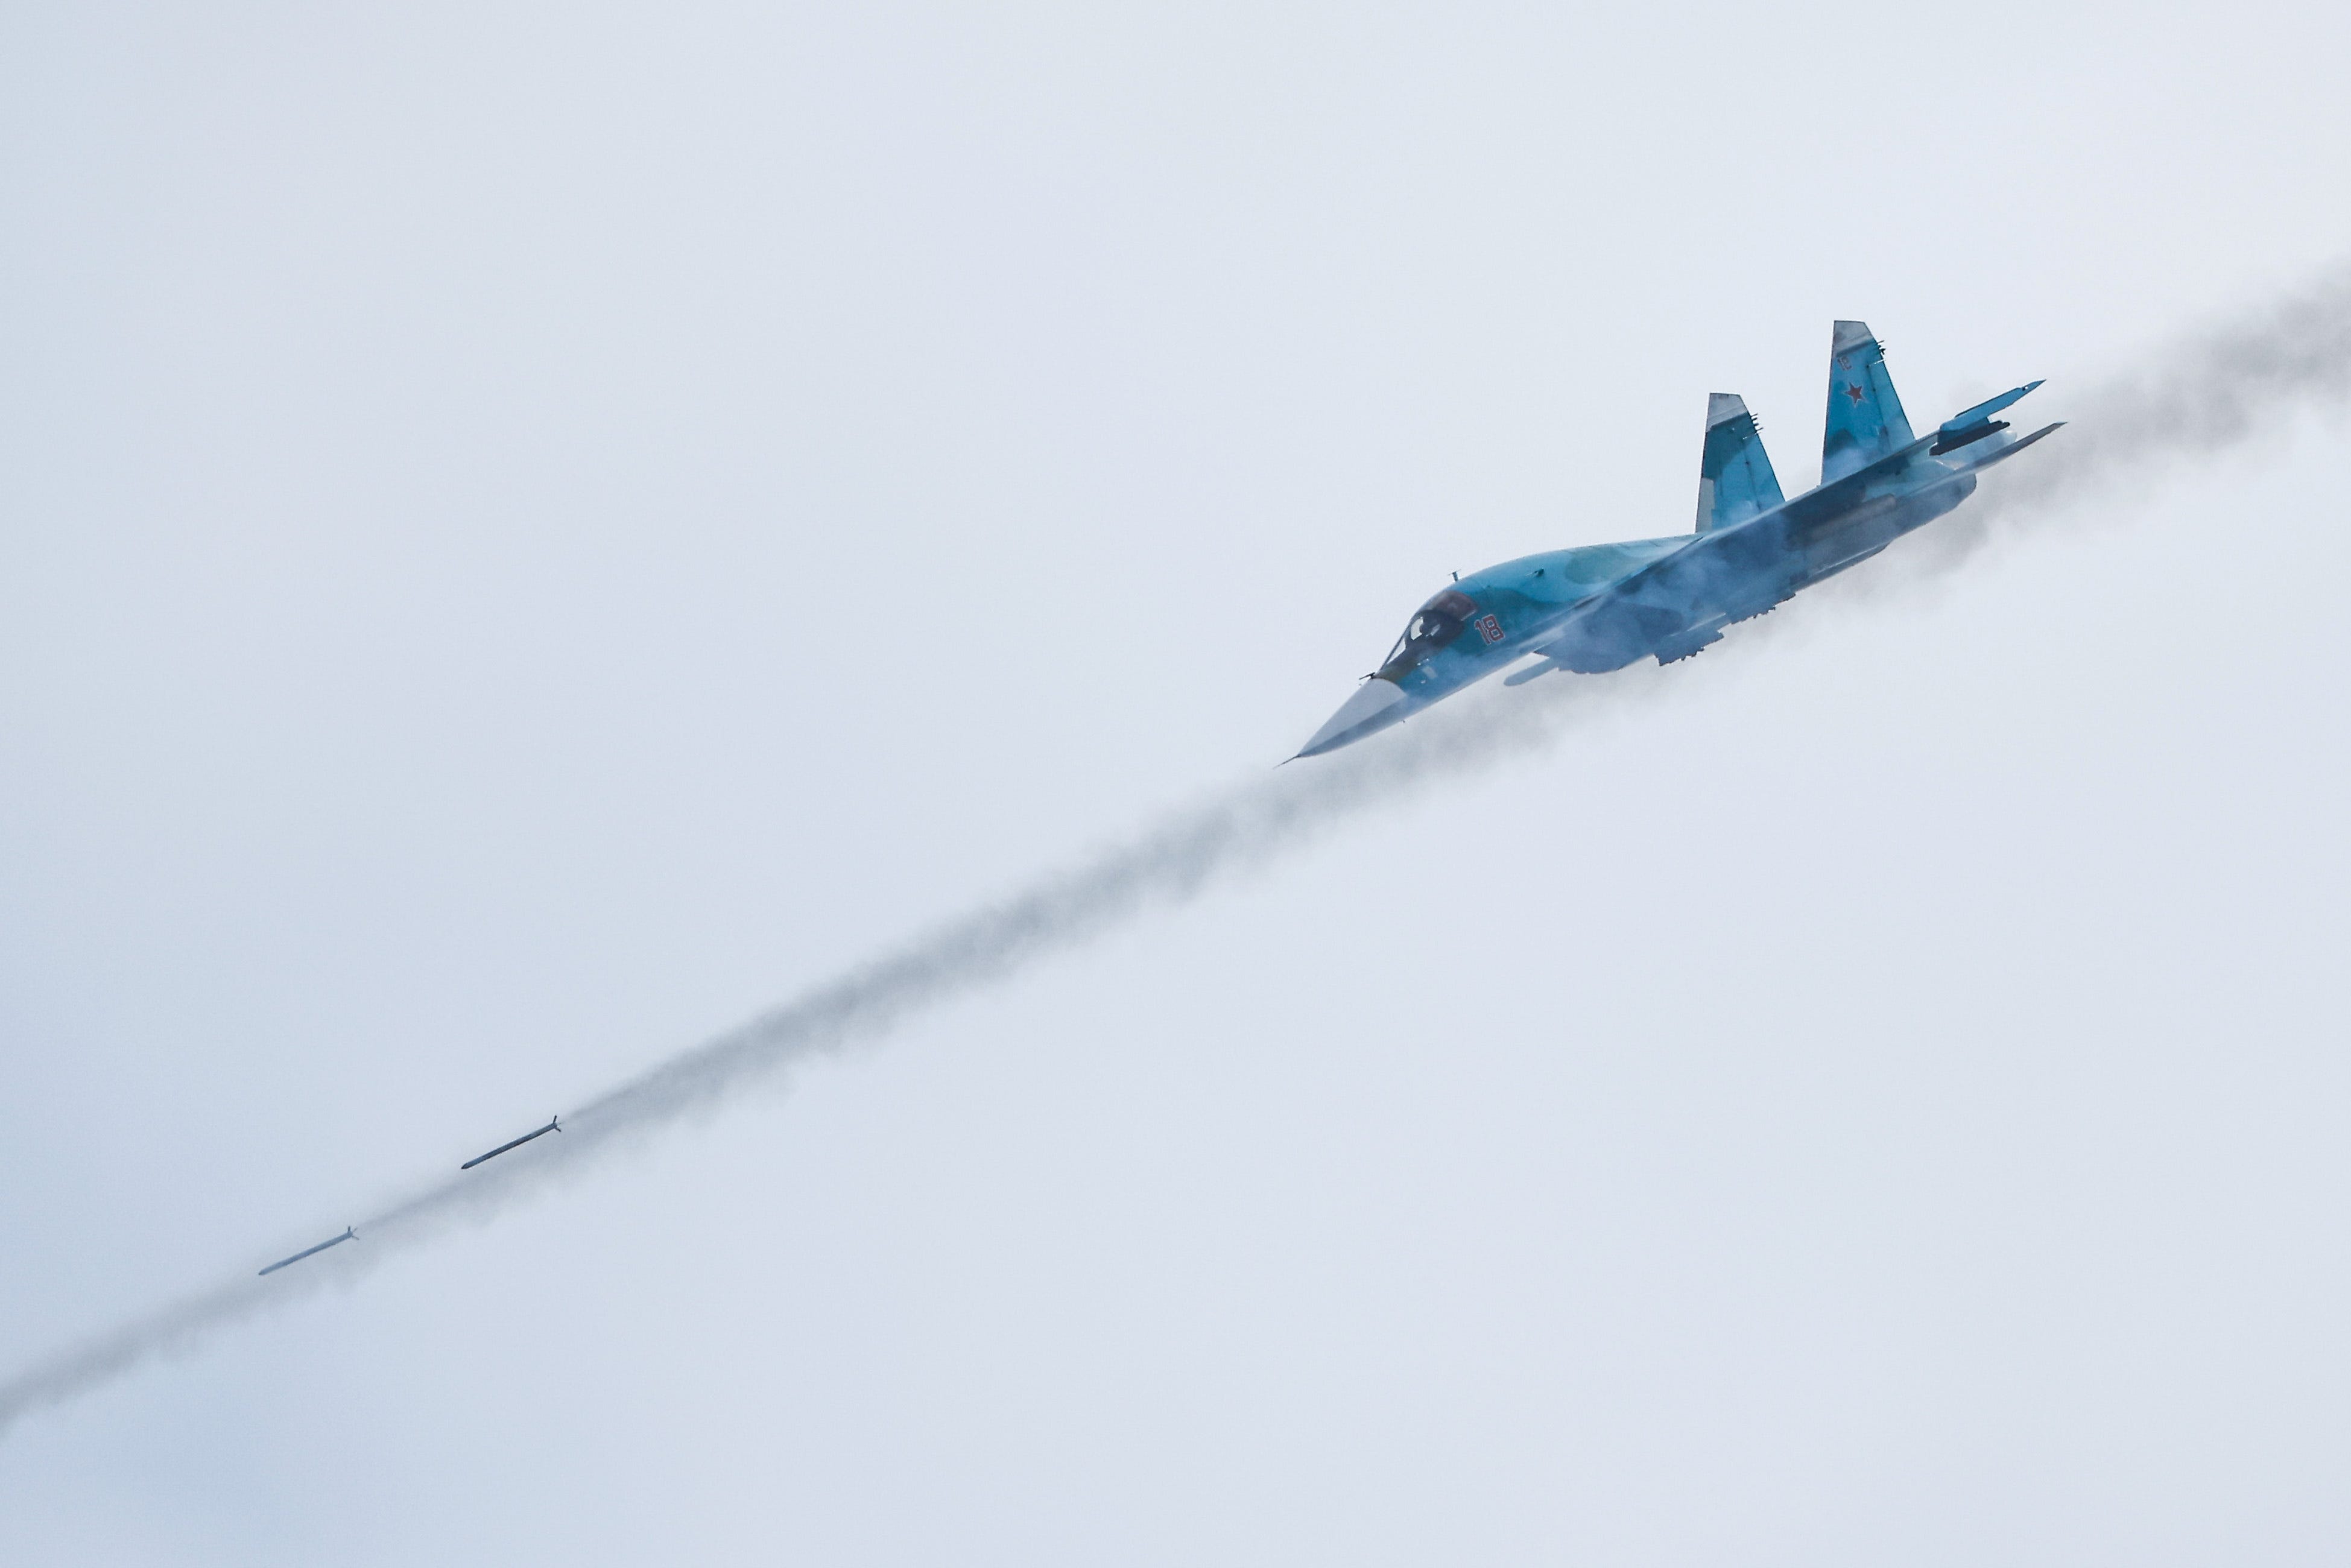 ukraine says it shot down 2 more russian fighter jets — extending its streak to 6 in just 3 days